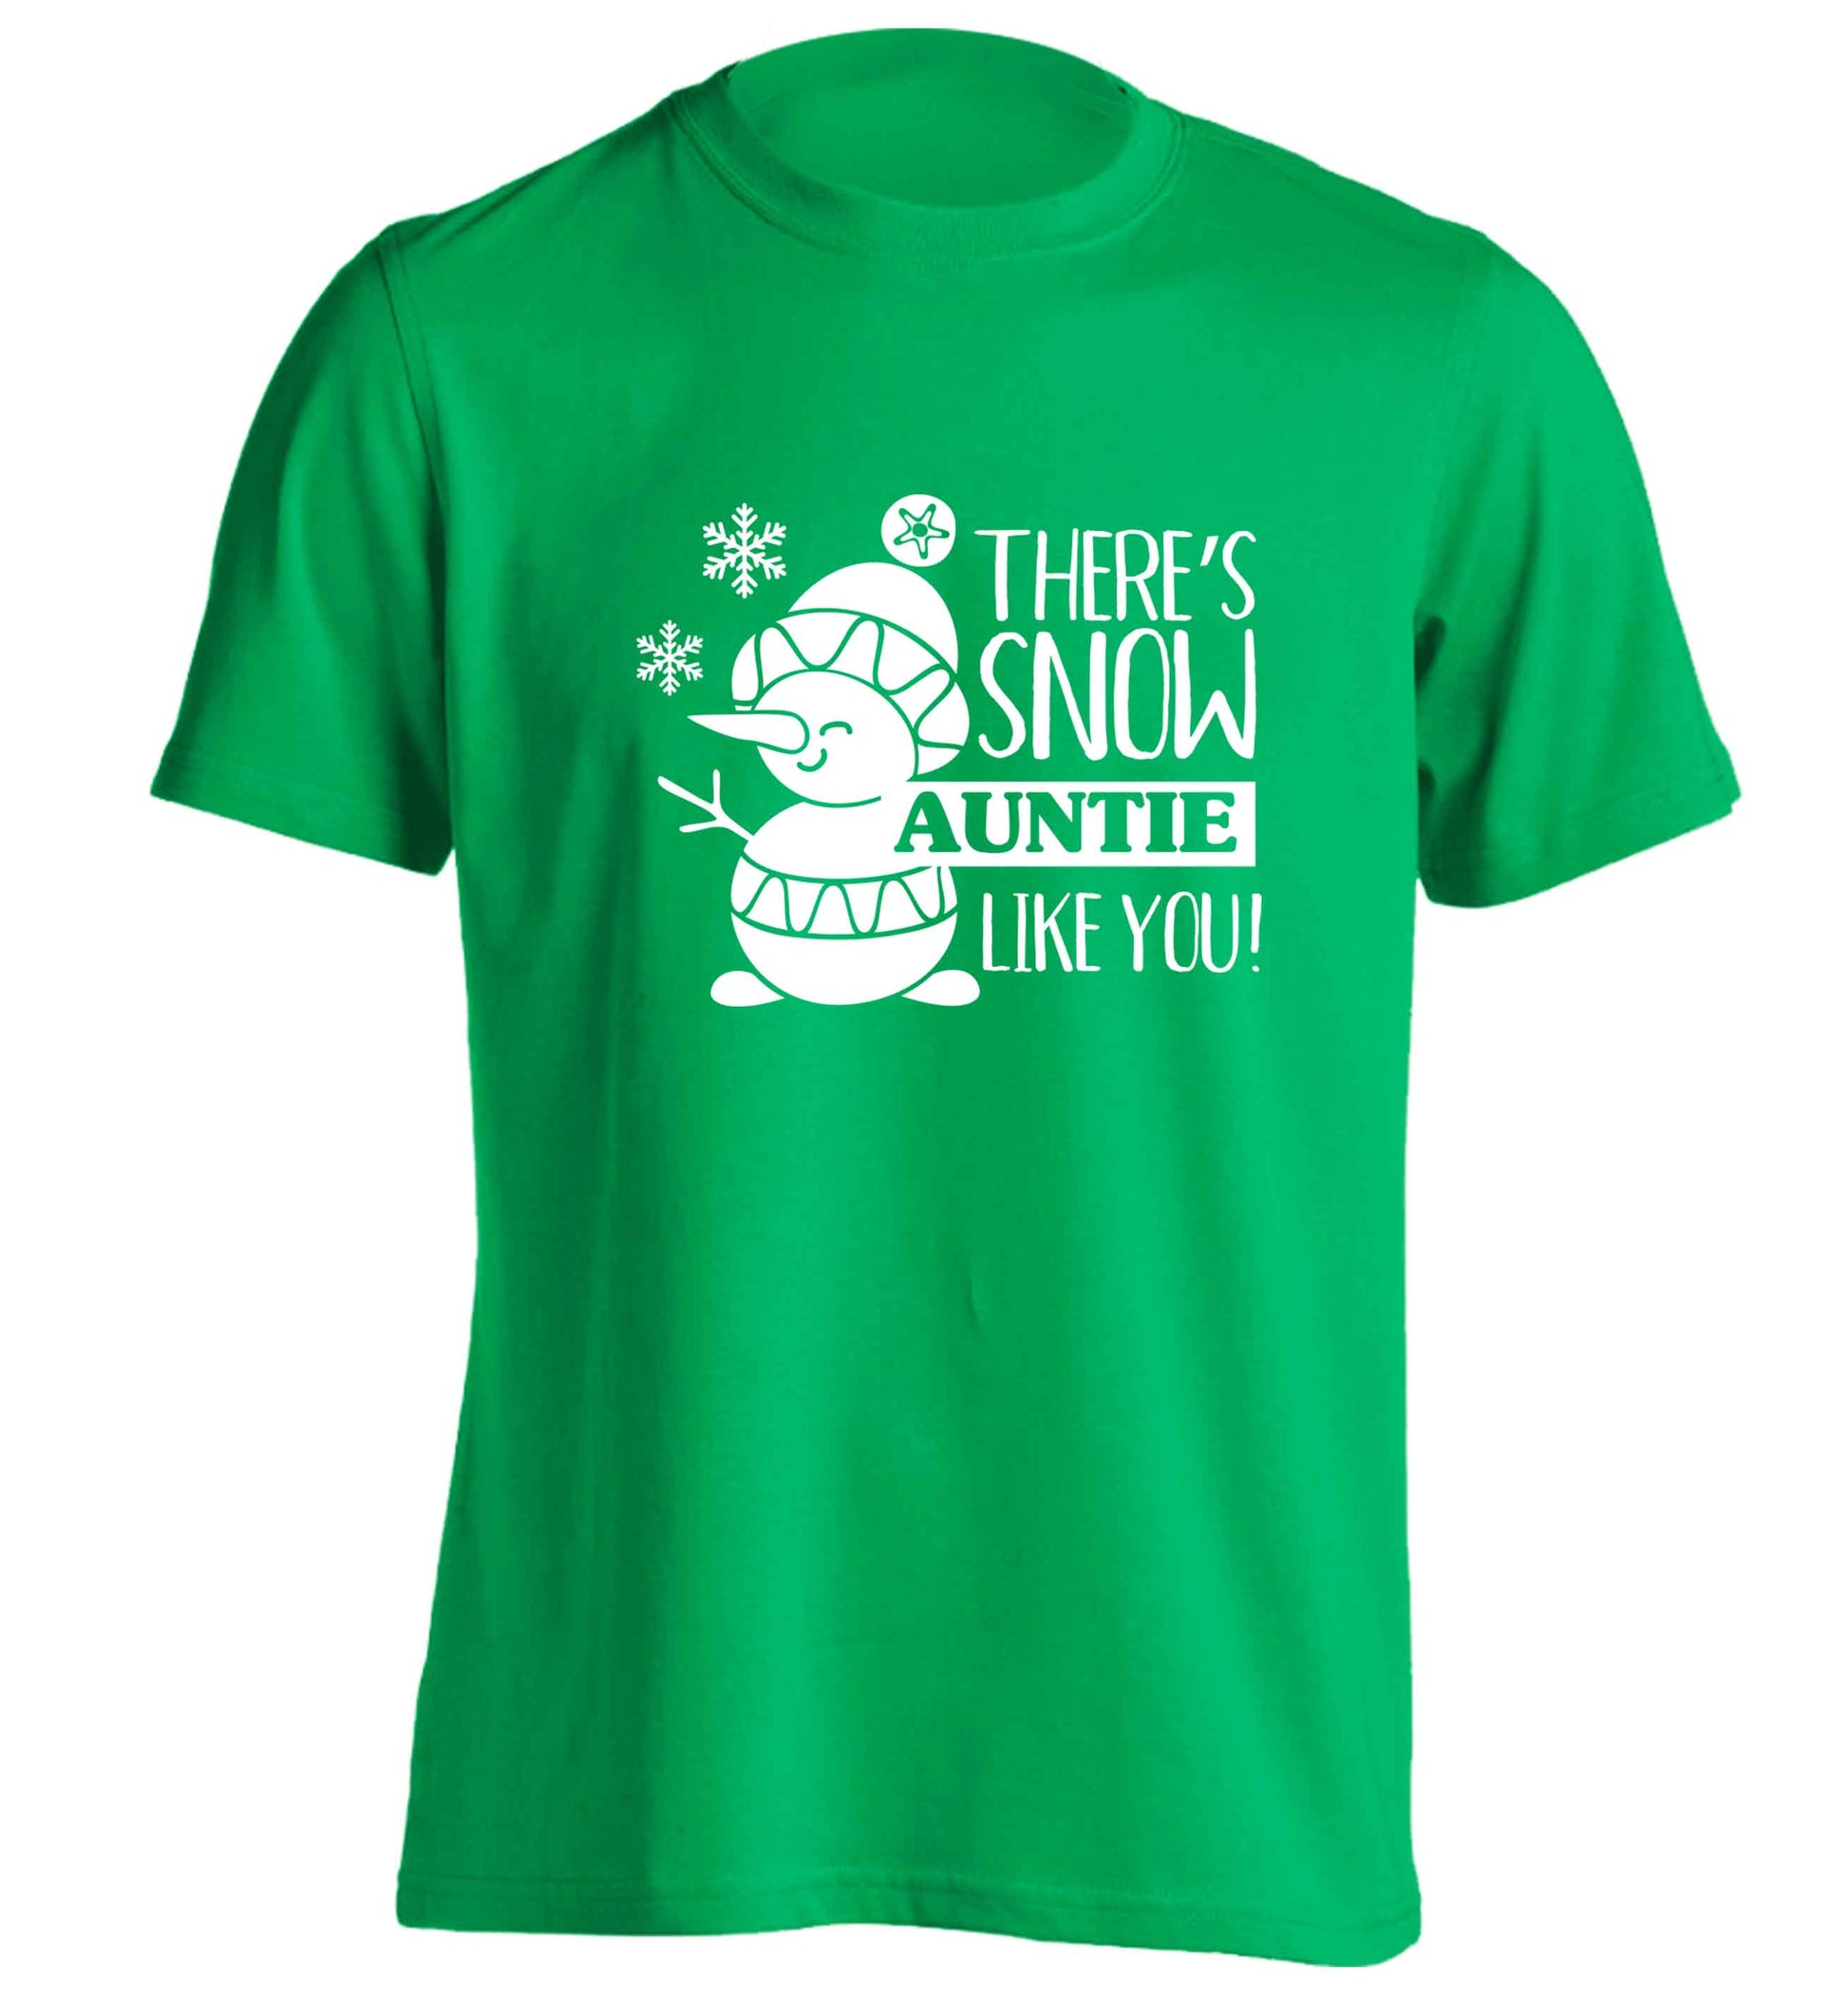 There's snow auntie like you adults unisex green Tshirt 2XL